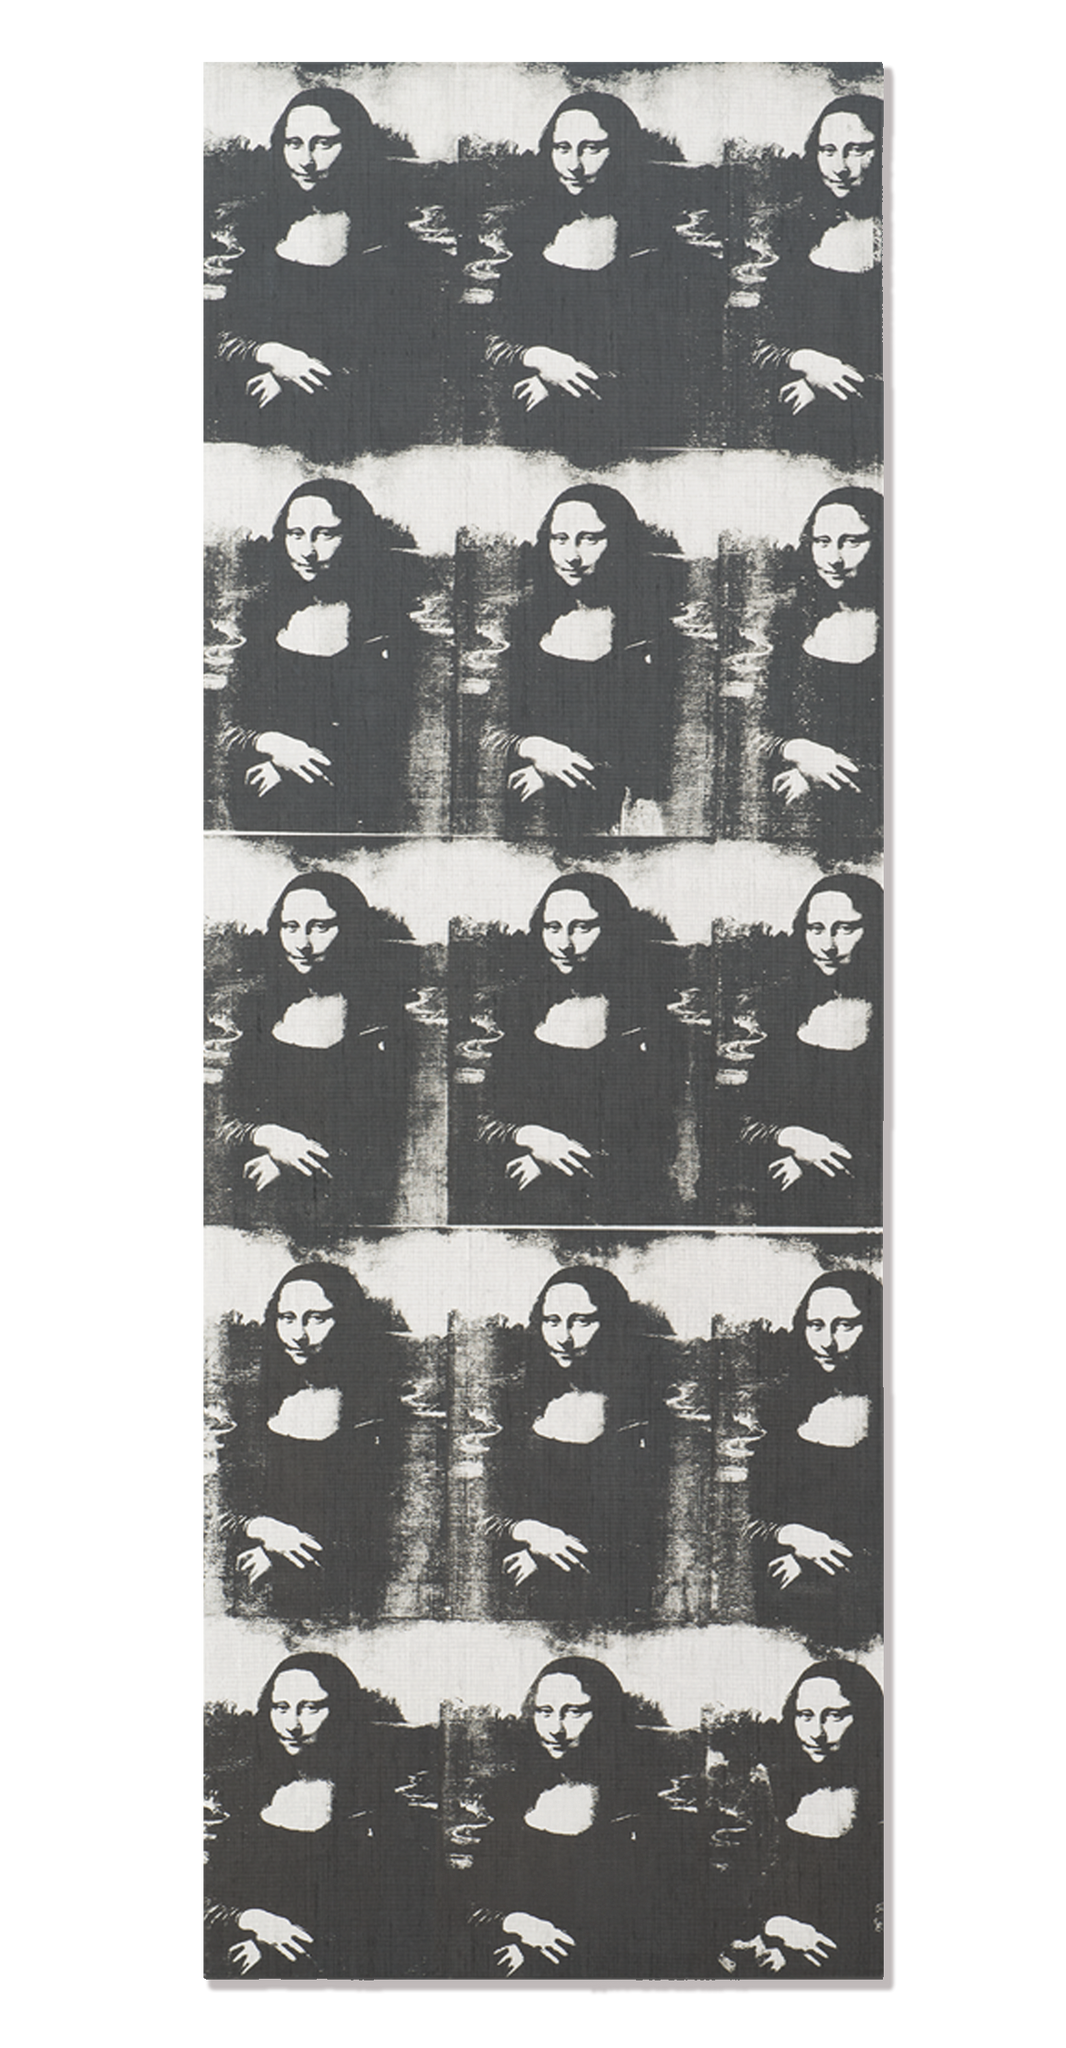 Andy Warhol "Thirty Are Better Than One" Yoga Mat